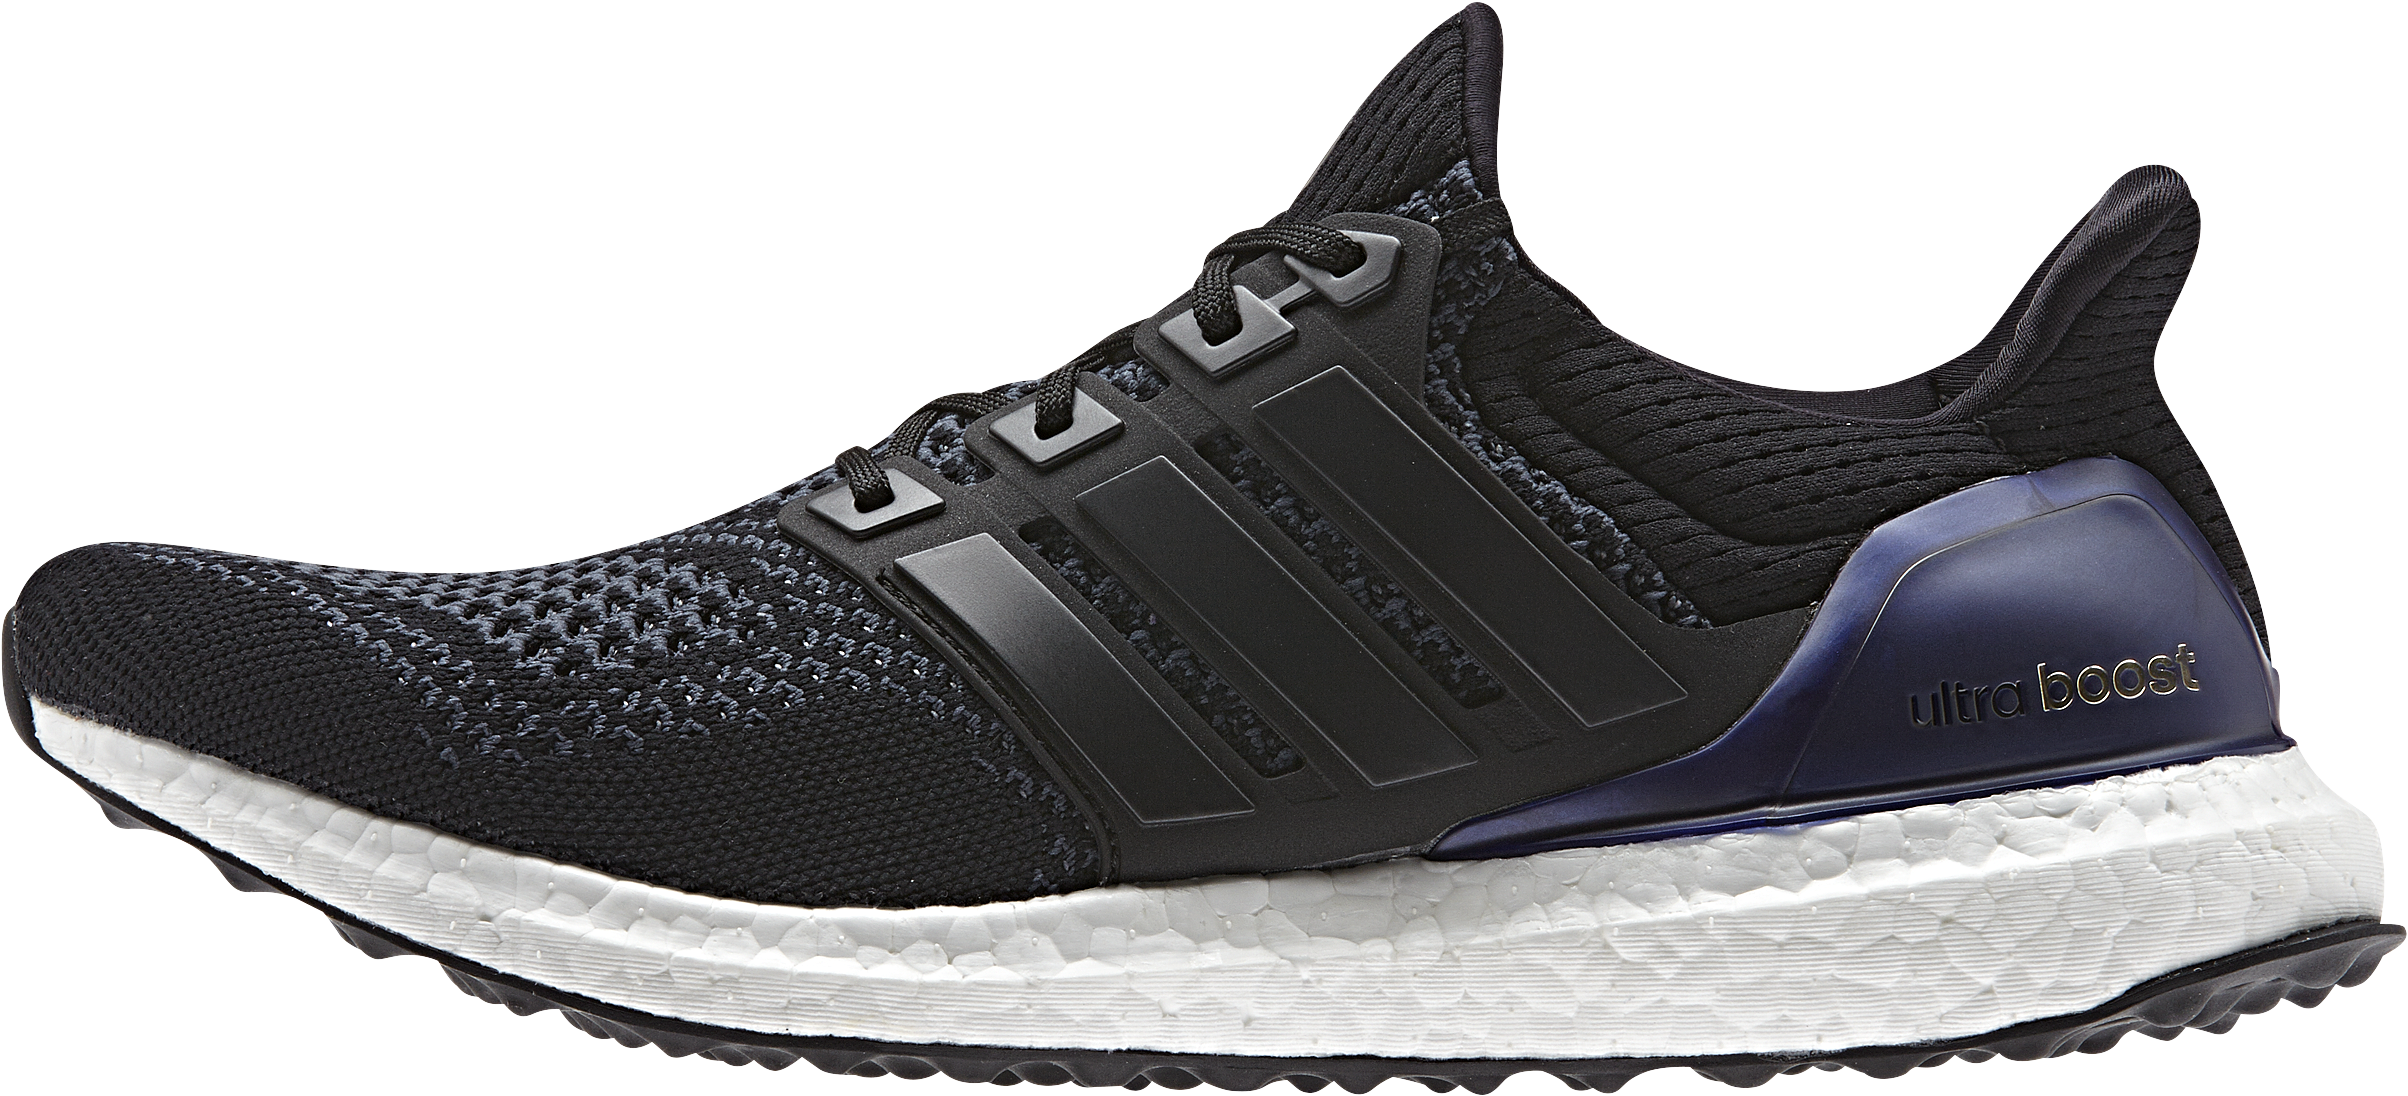 ultra boost unchanged